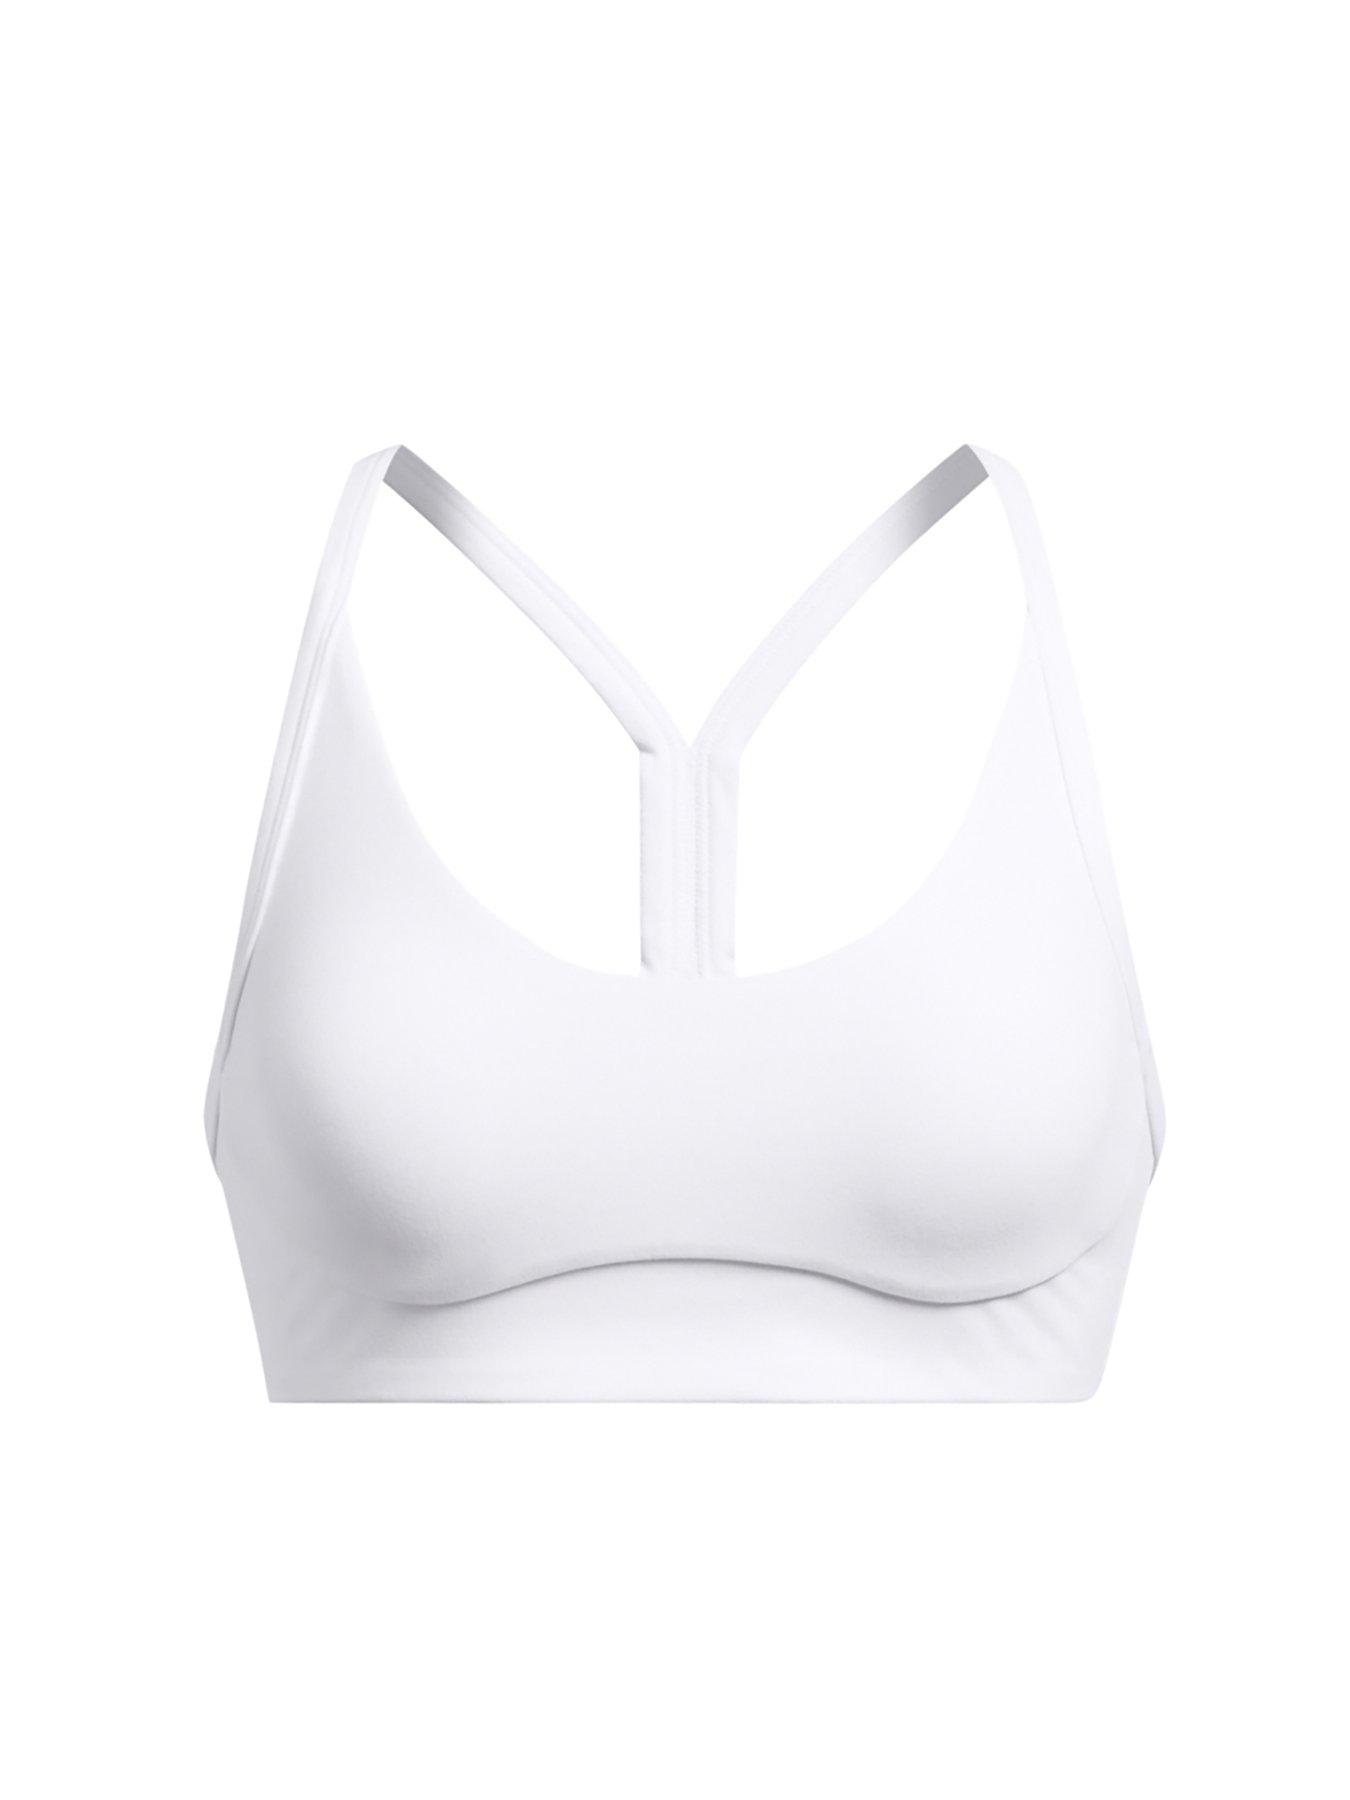 UNDER ARMOUR Womens Training Infinity Low Strappy Bra A-C cup - Grey